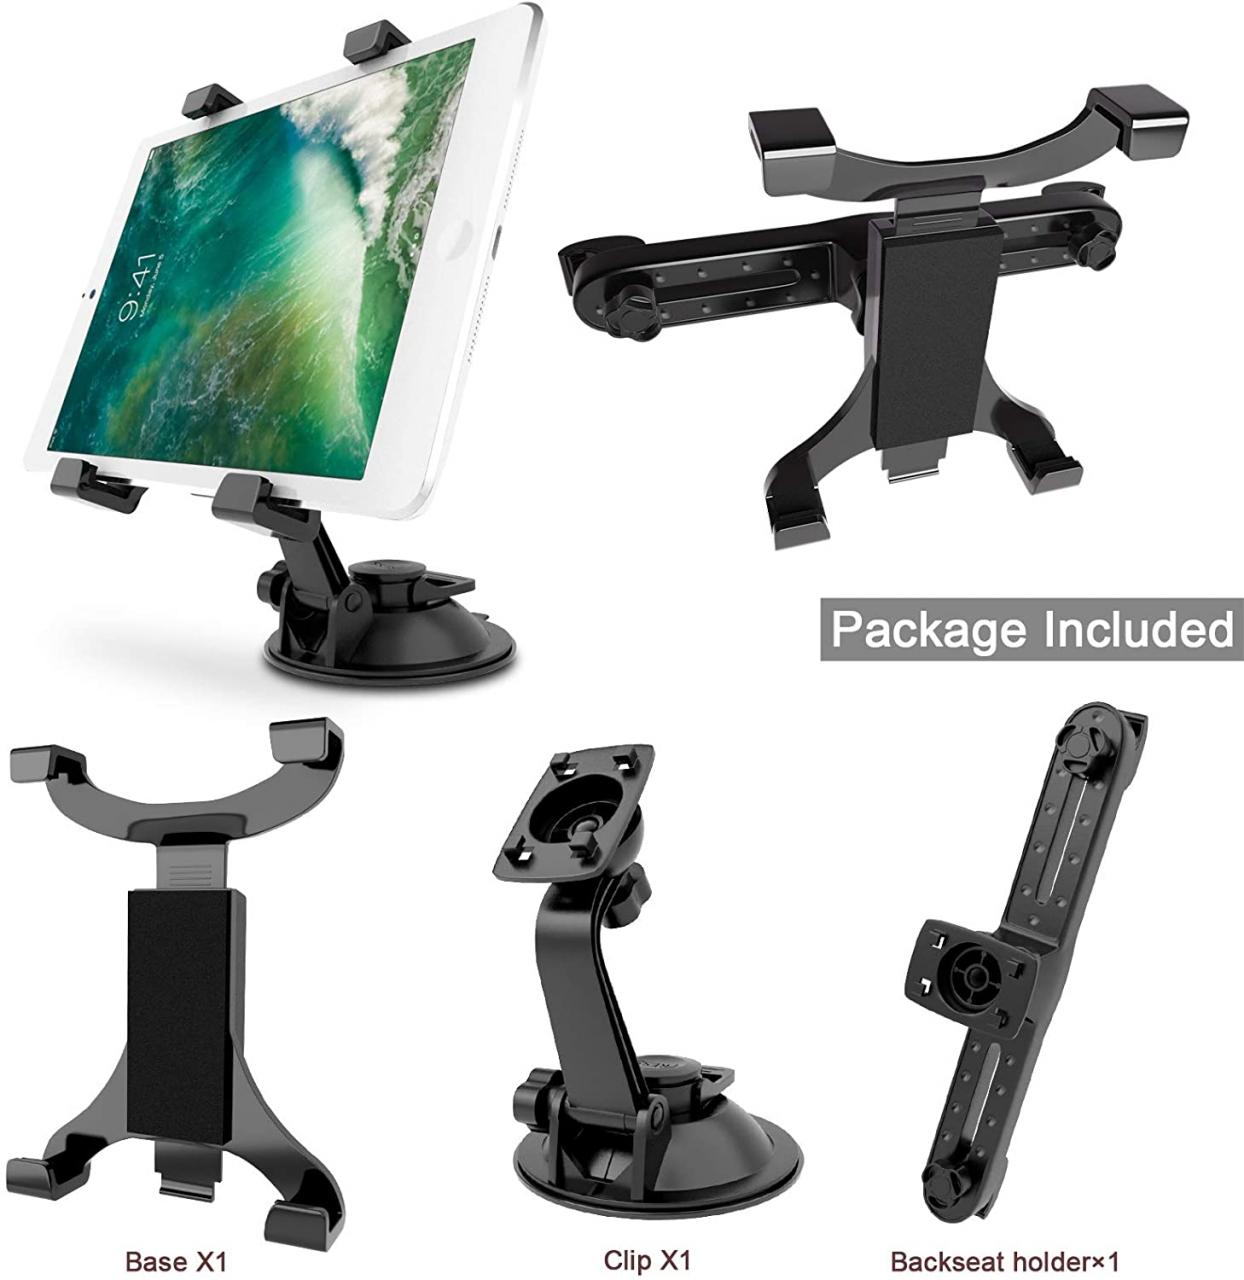 Dealgadgets 360 Degrees Adjustable Tablet Car Mount Holder for 7-10 Inches  Tablets: Samsung Galaxy Tab 3 4 pro Note 7.0/8.0/8.4/10.1, Sony Xperia Z/Z2  Tablet, iPad Air/Mini/1 2 3 4 5, etc : Amazon.ca: Electronics